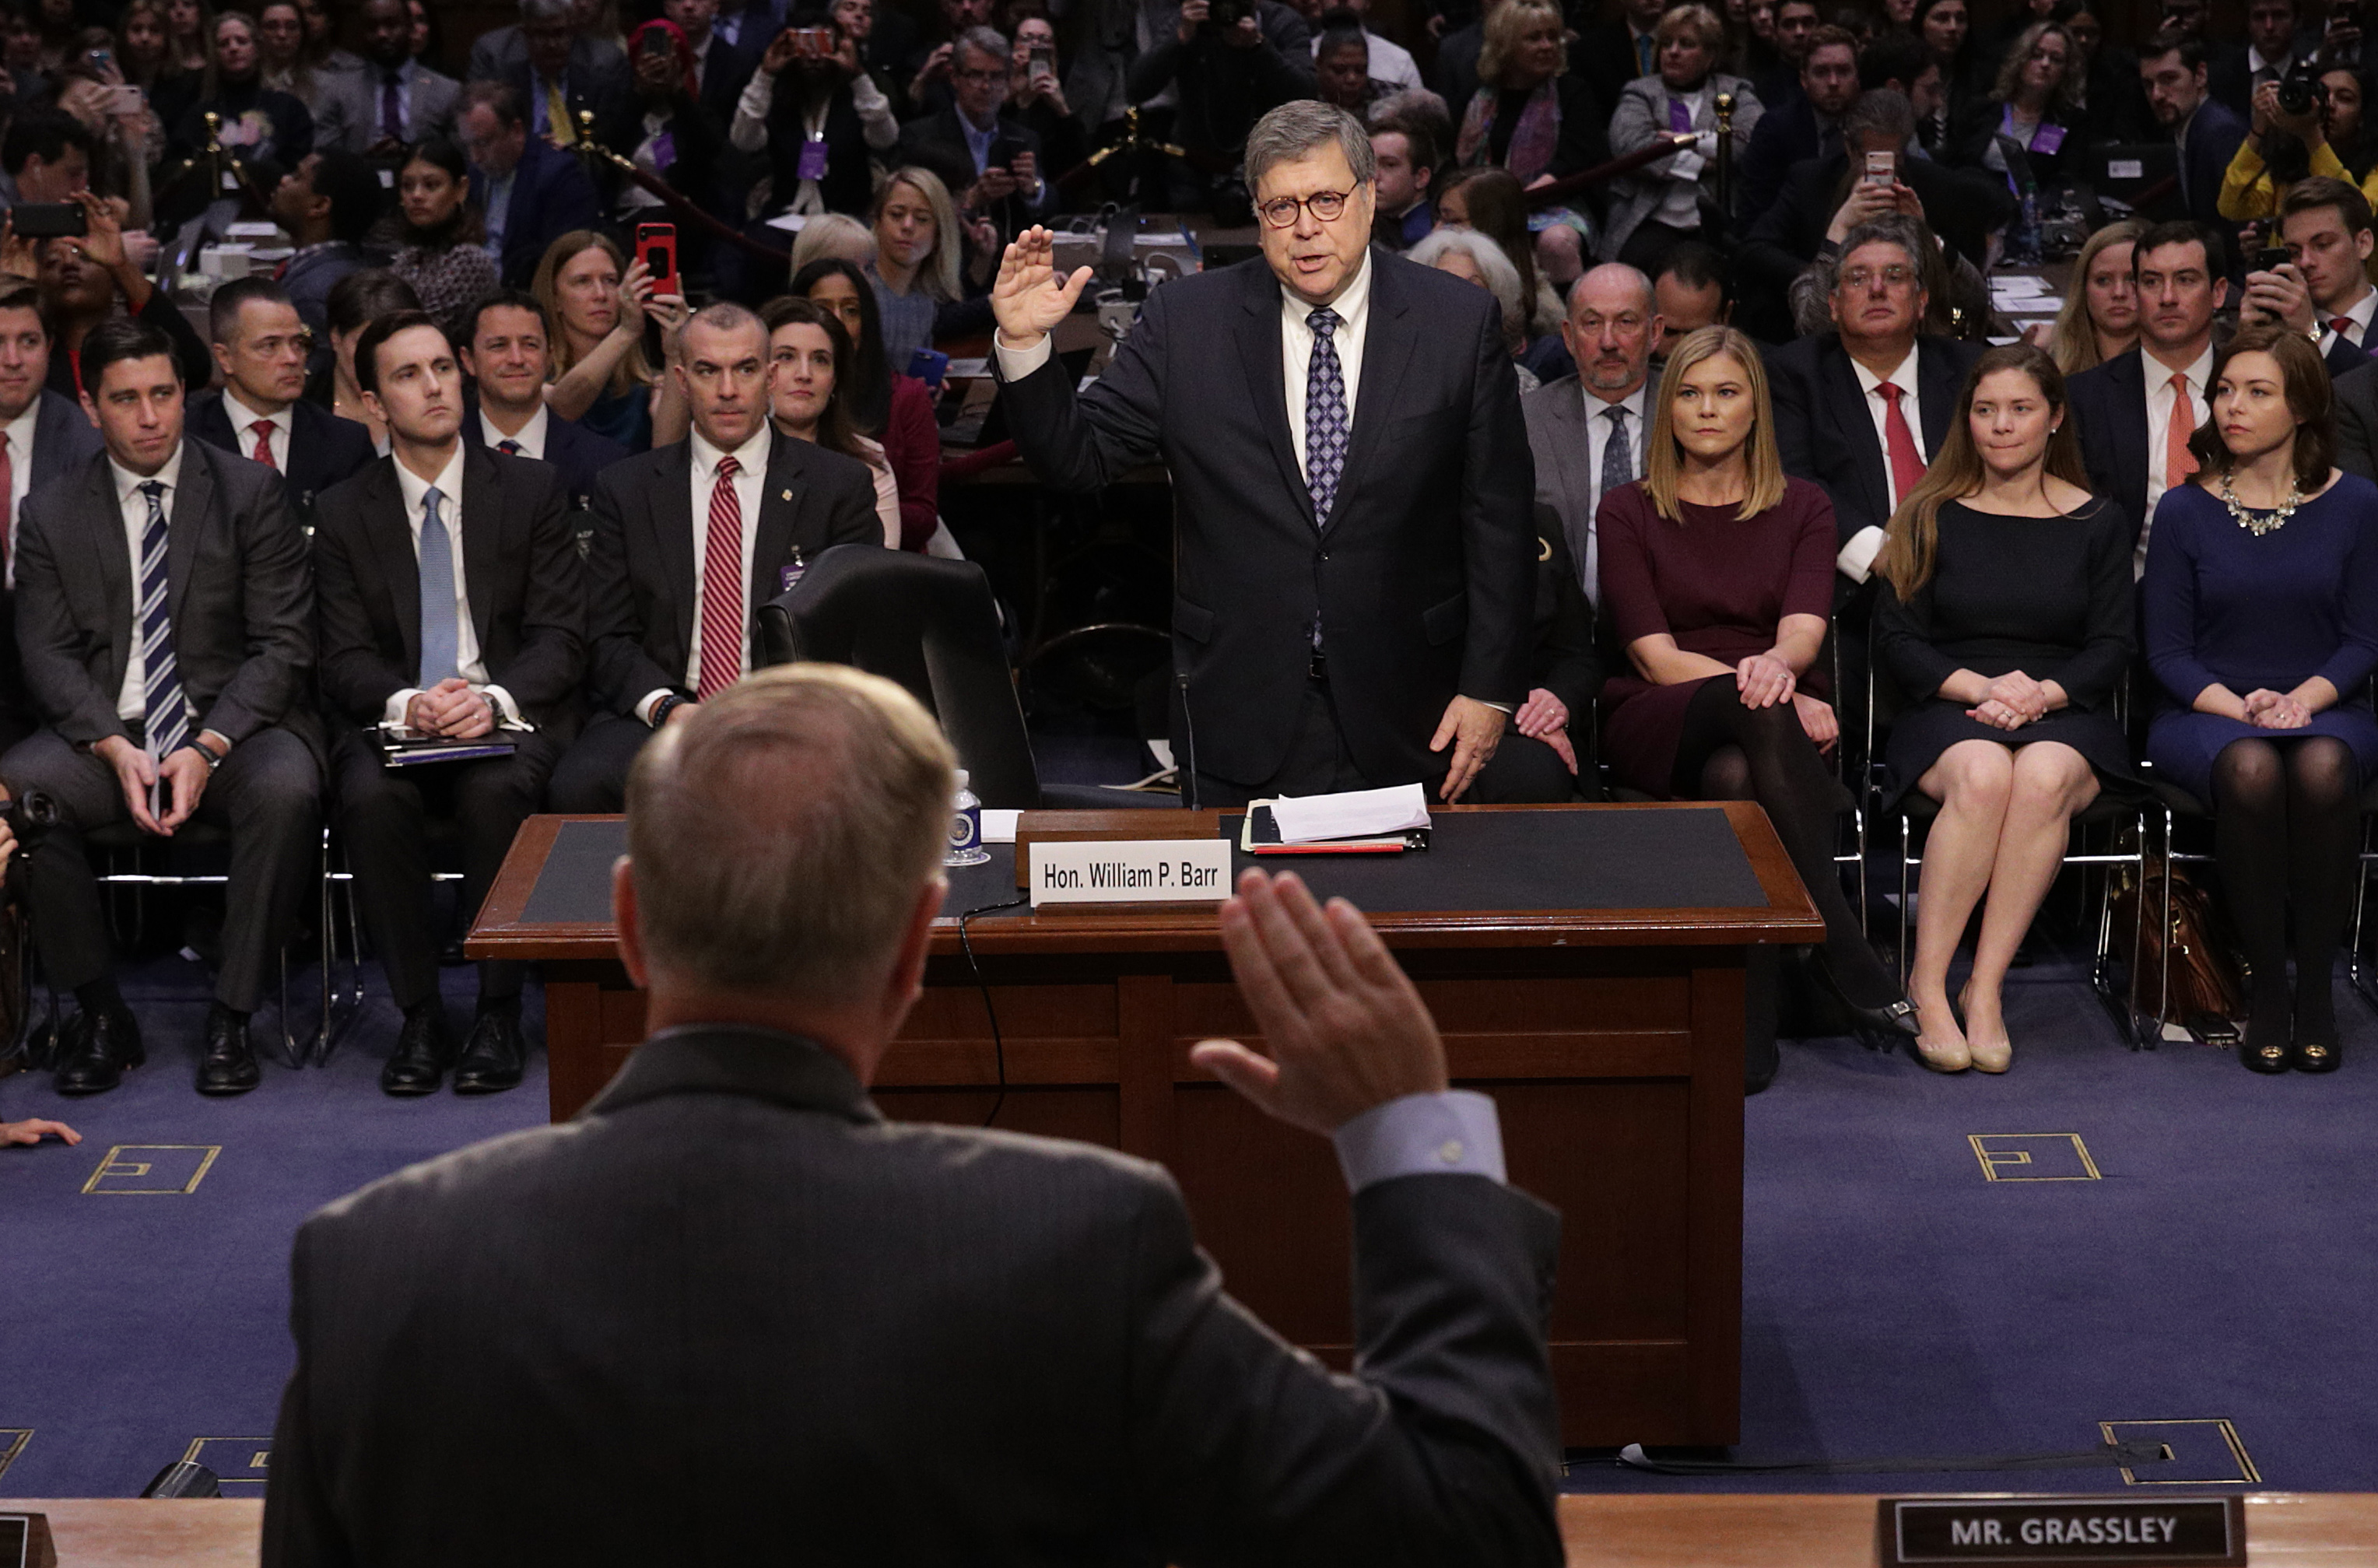 WASHINGTON, DC - JANUARY 15: U.S. Attorney General nominee William Barr (C) is sworn by Senate Judiciary Committee chairman Lindsey Graham (standing) prior to Barr testifying at his confirmation hearing January 15, 2019 in Washington, DC. Barr, who previously served as Attorney General under President George H. W. Bush, was confronted about his views on the investigation being conducted by special counsel Robert Mueller. (Photo by Alex Wong/Getty Images)